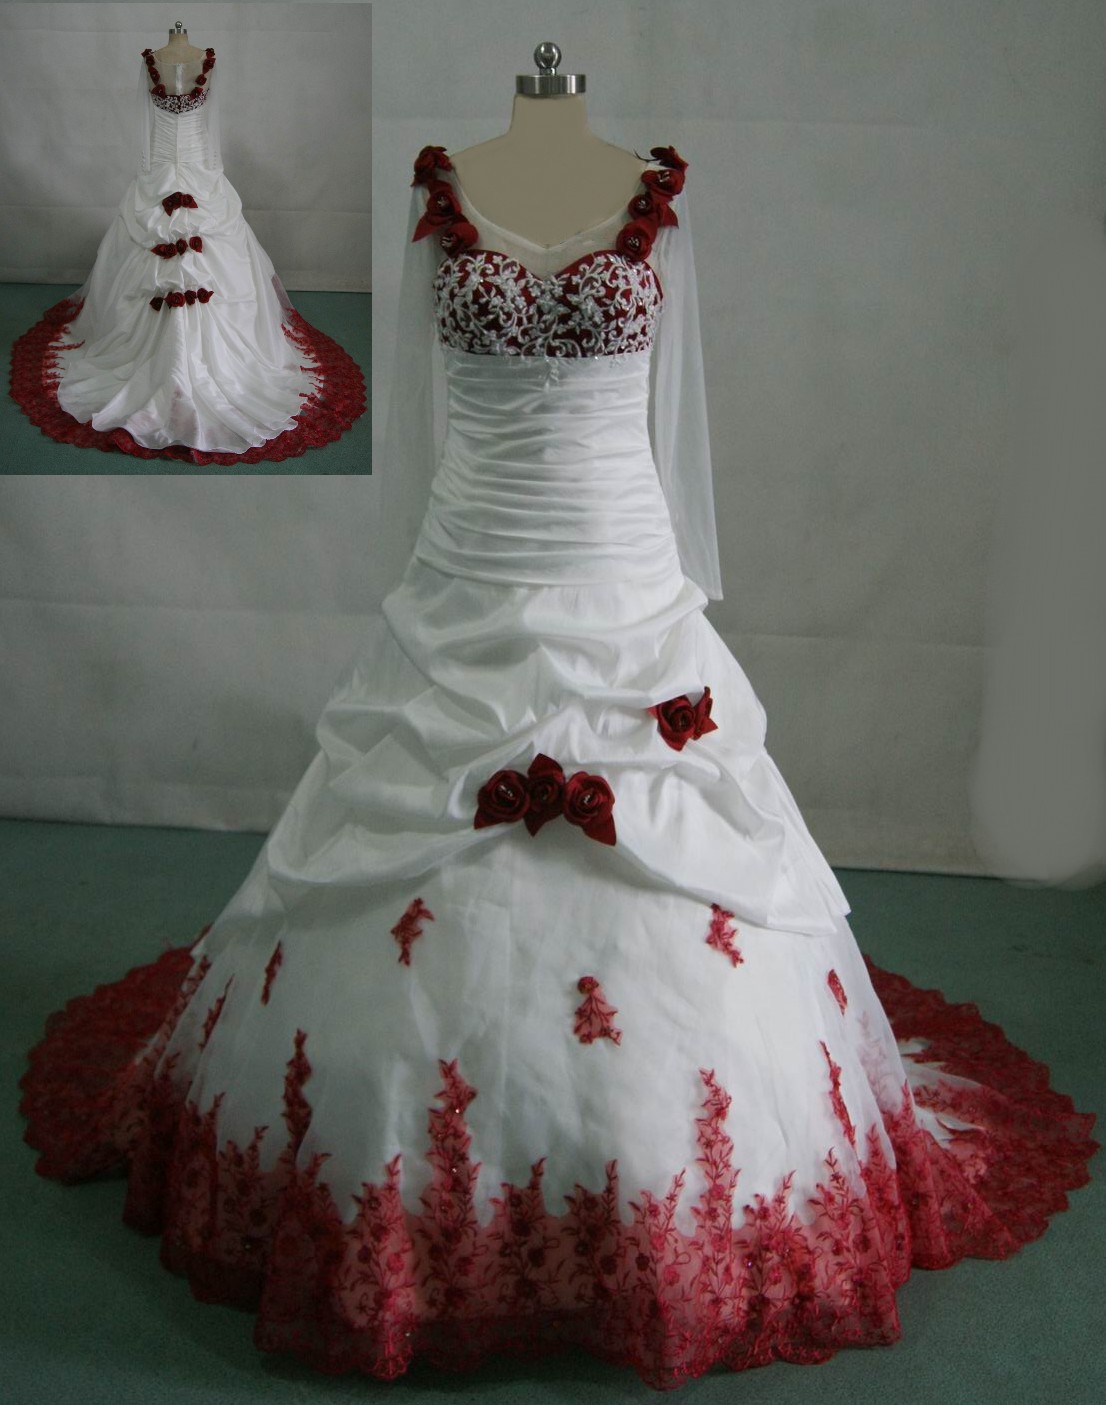 White wedding gown with red roses on the dress.